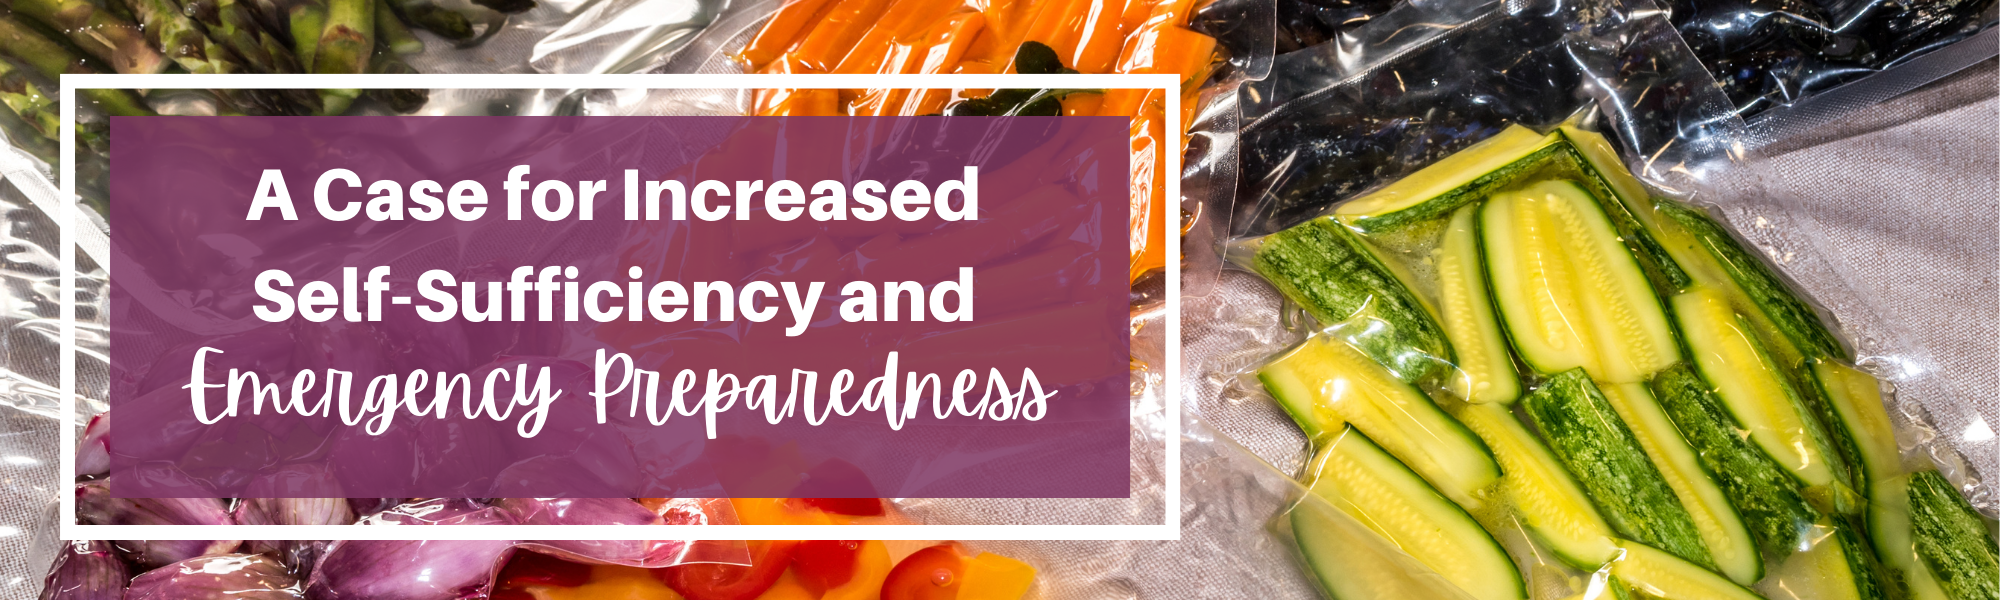 Self-Sufficiency and Emergency Preparedness